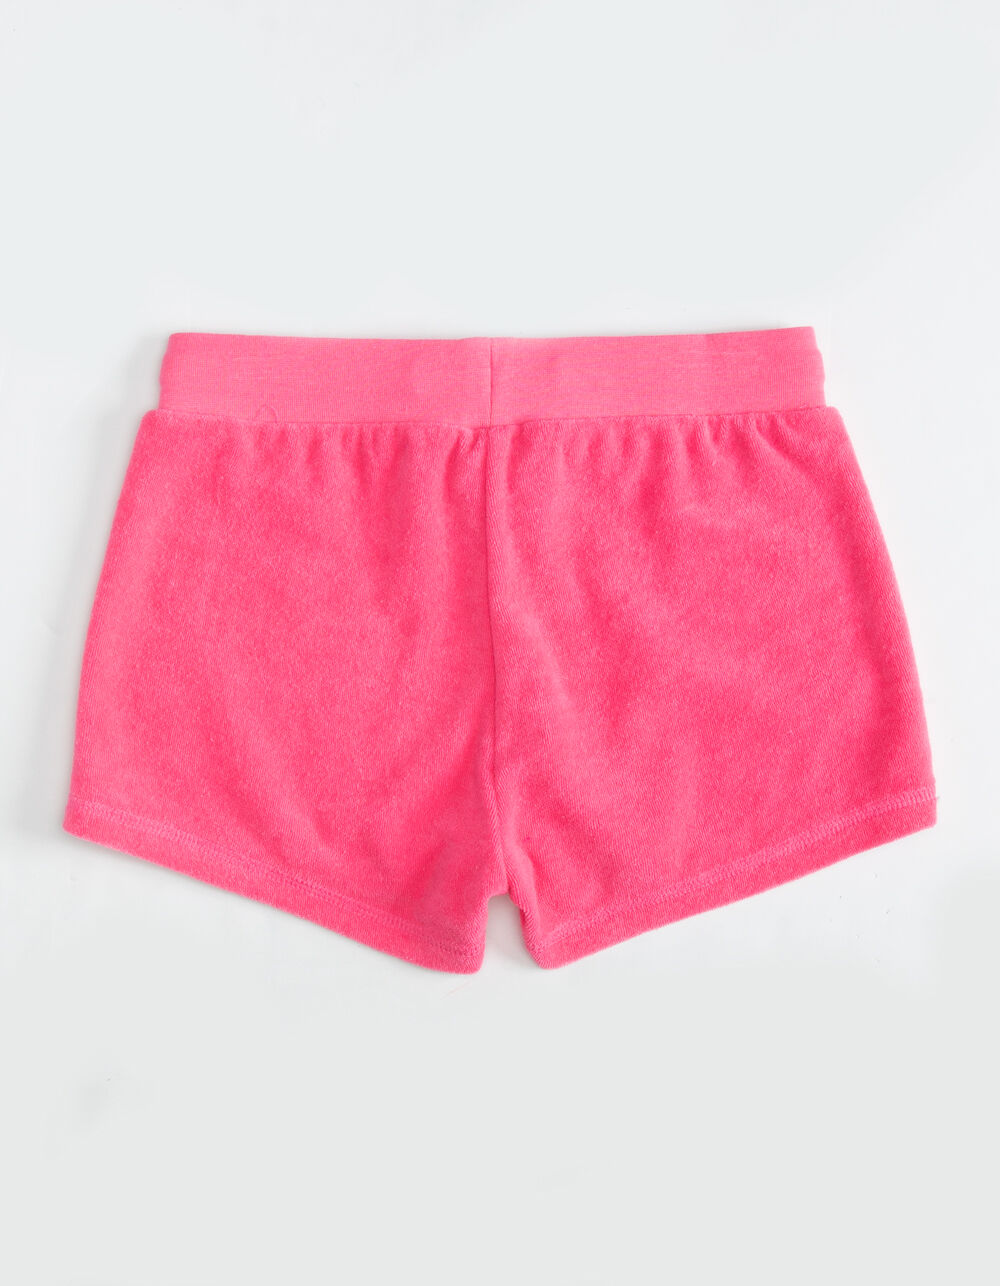 MAUI AND SONS Solid French Terry Girls Pink Shorts - PINK | Tillys